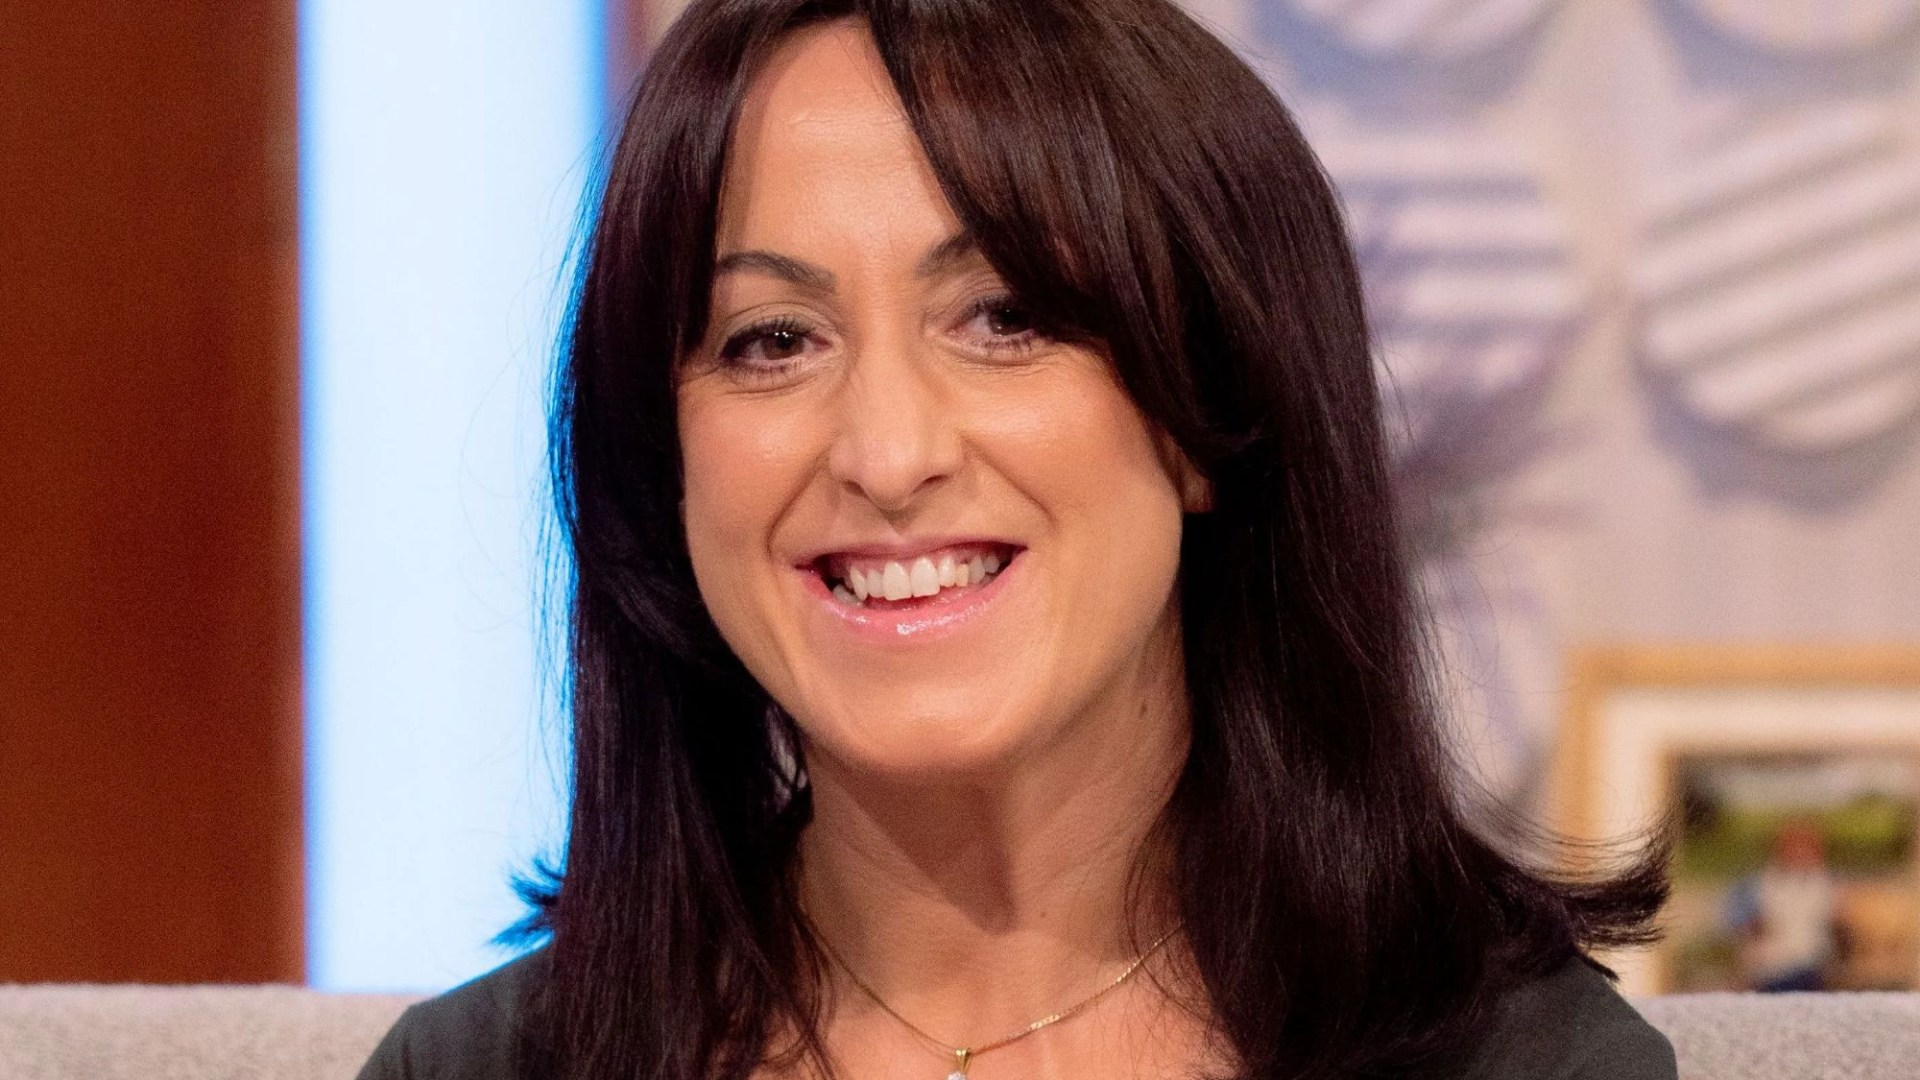 Breaking News: EastEnders Star Natalie Cassidy Falls ‘Very Ill’, Misses Filming as Sonia – Chaos Ensues!